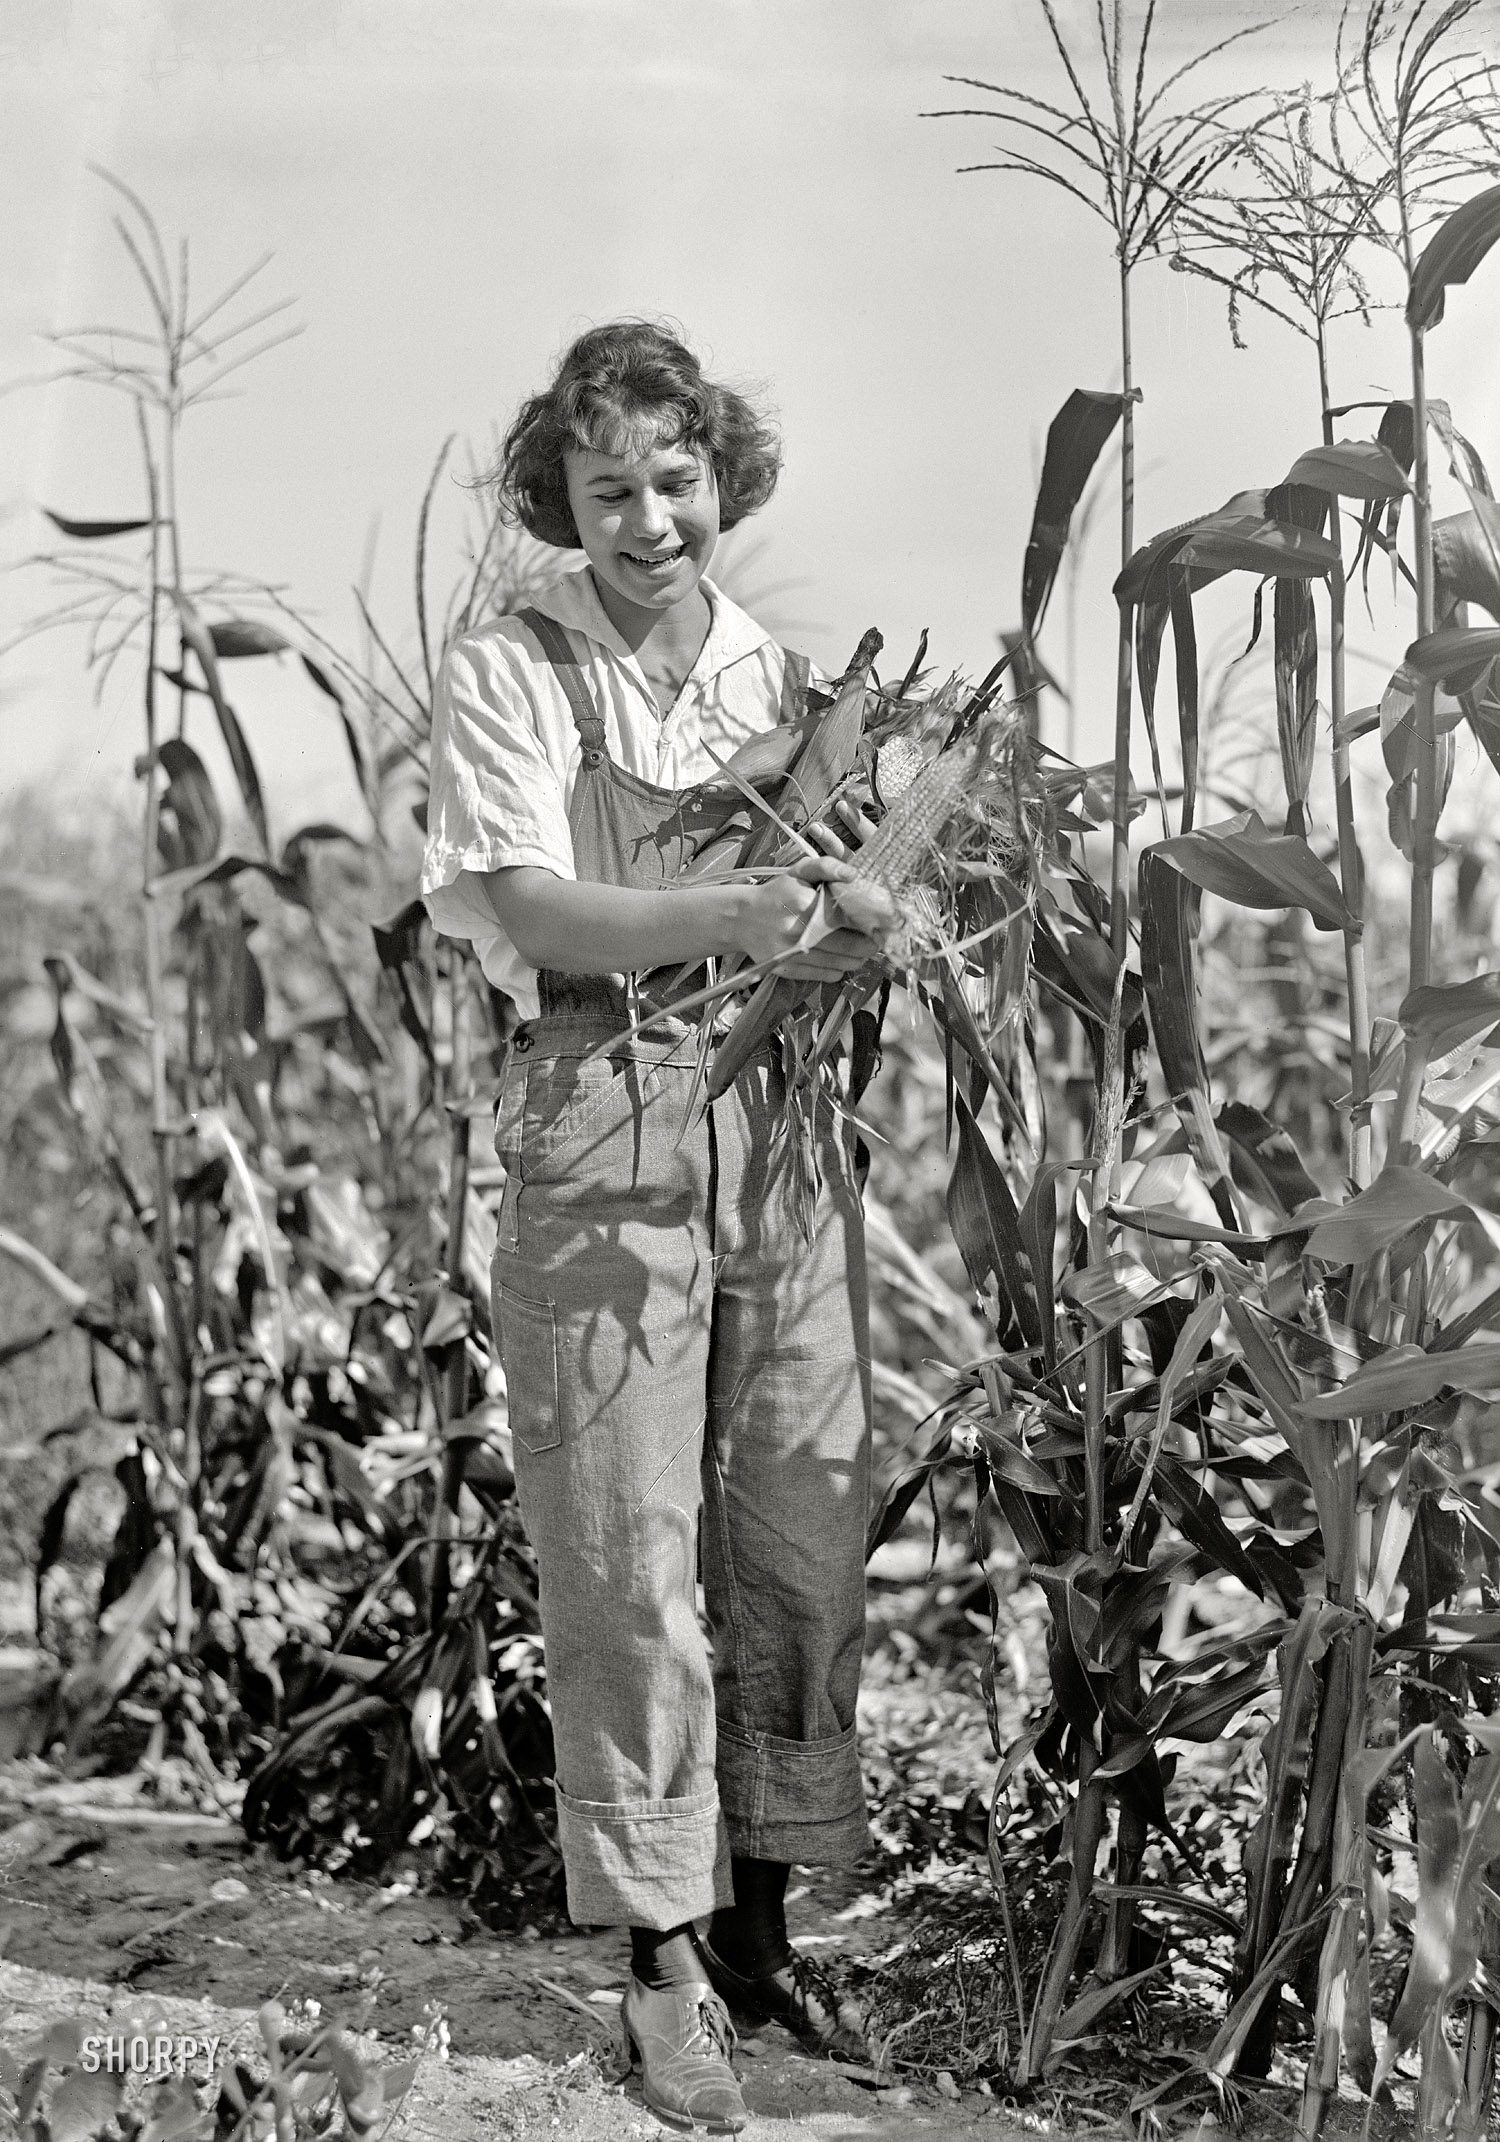 1919. Washington, D.C., or vicinity. "Girl Scouts. Farmerette harvesting crops." Harris & Ewing Collection glass negative. View full size.